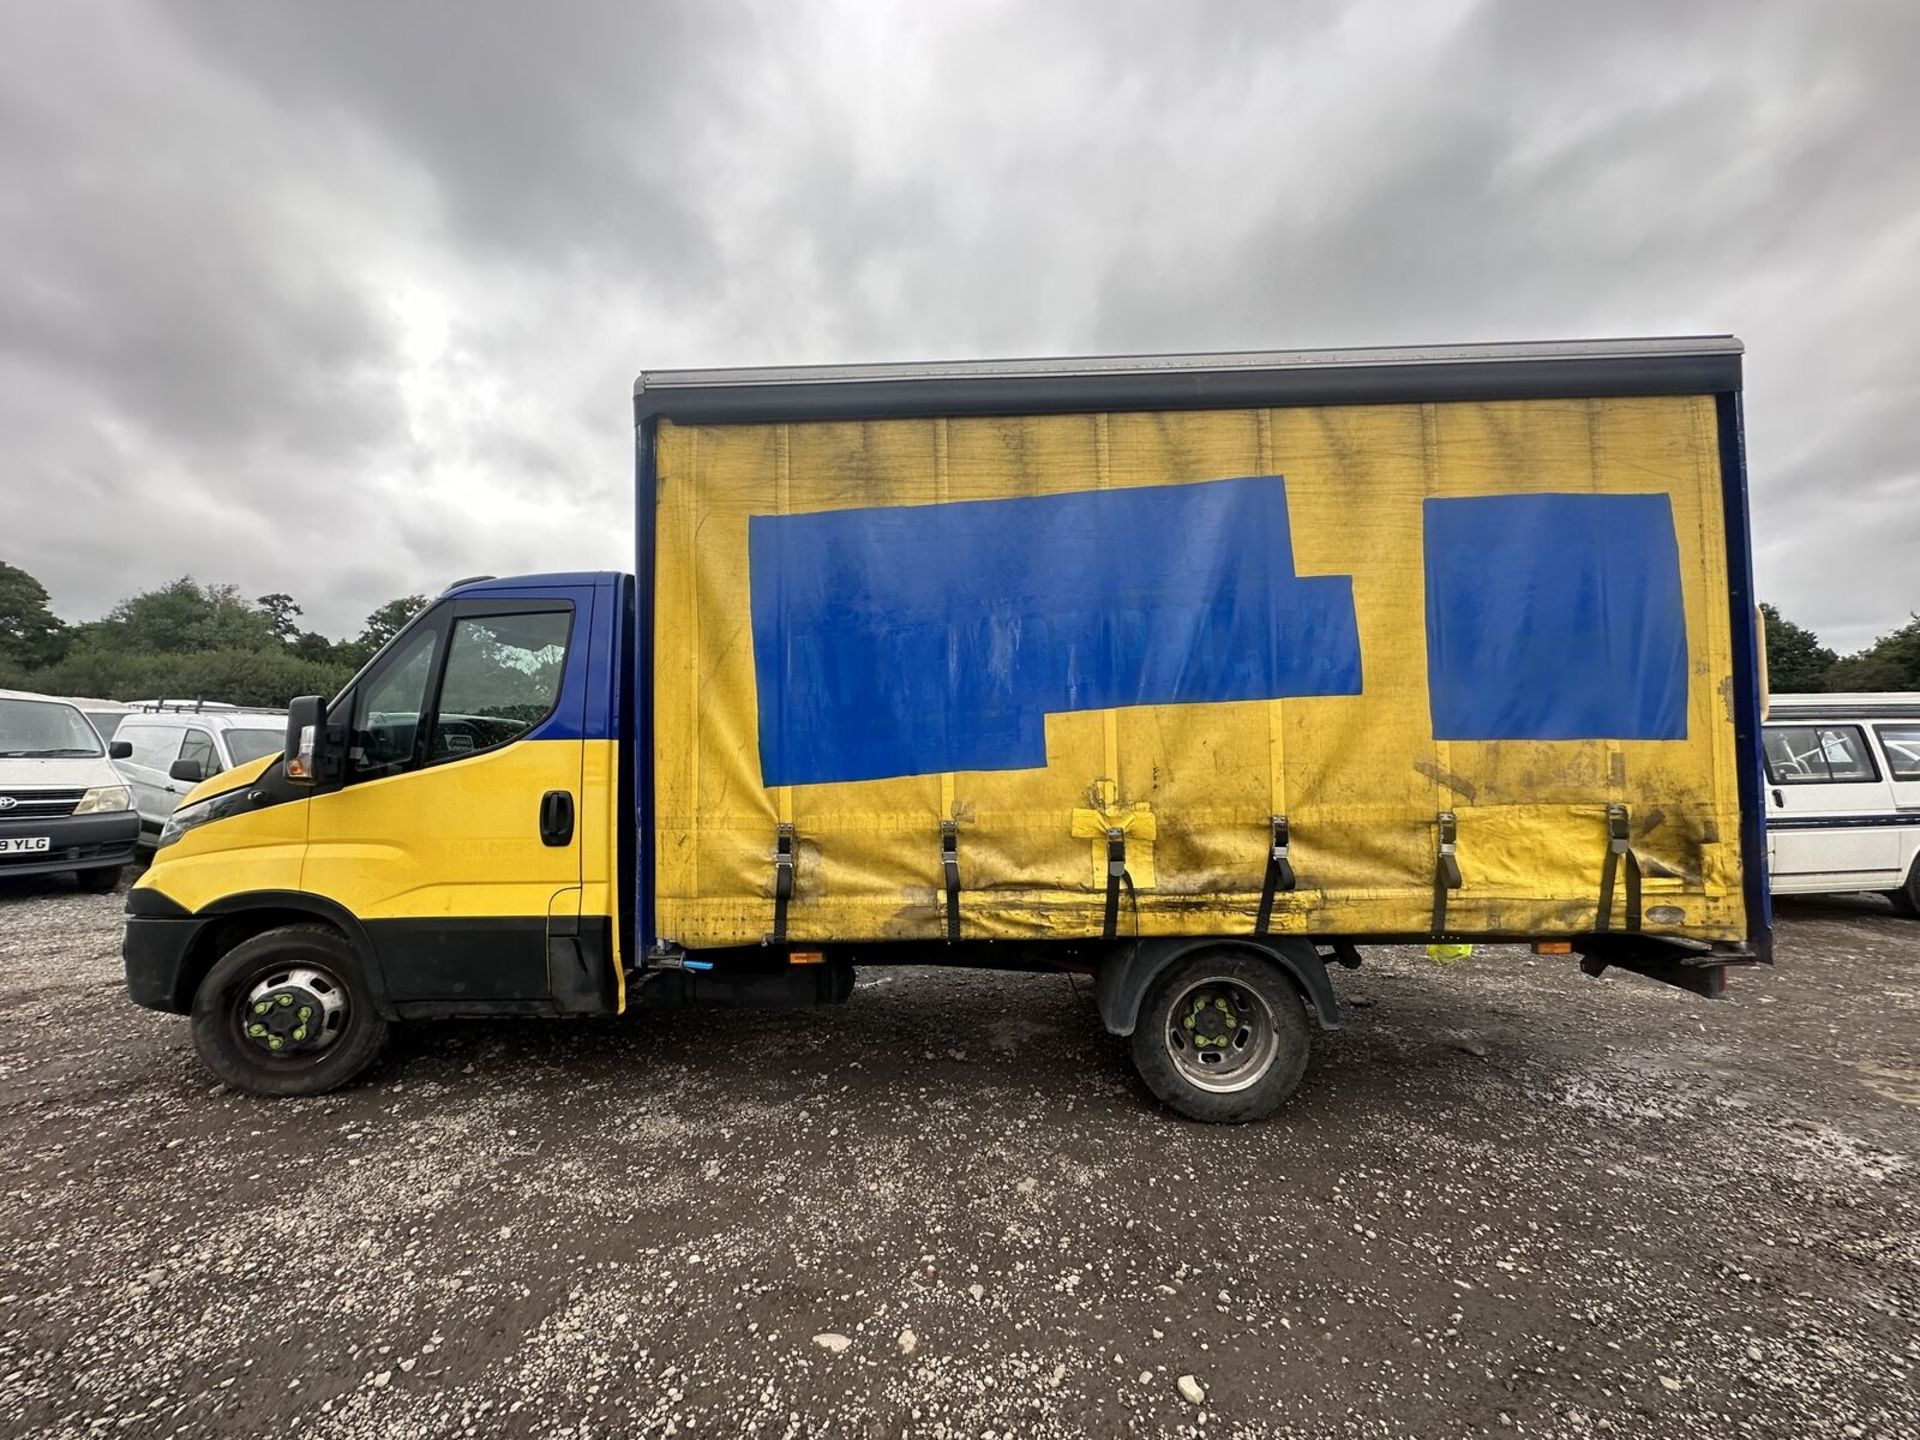 2017 IVECO DAILY 35C14: EFFICIENT CURTAINSIDER LUTON VAN ONLY 75K MILES